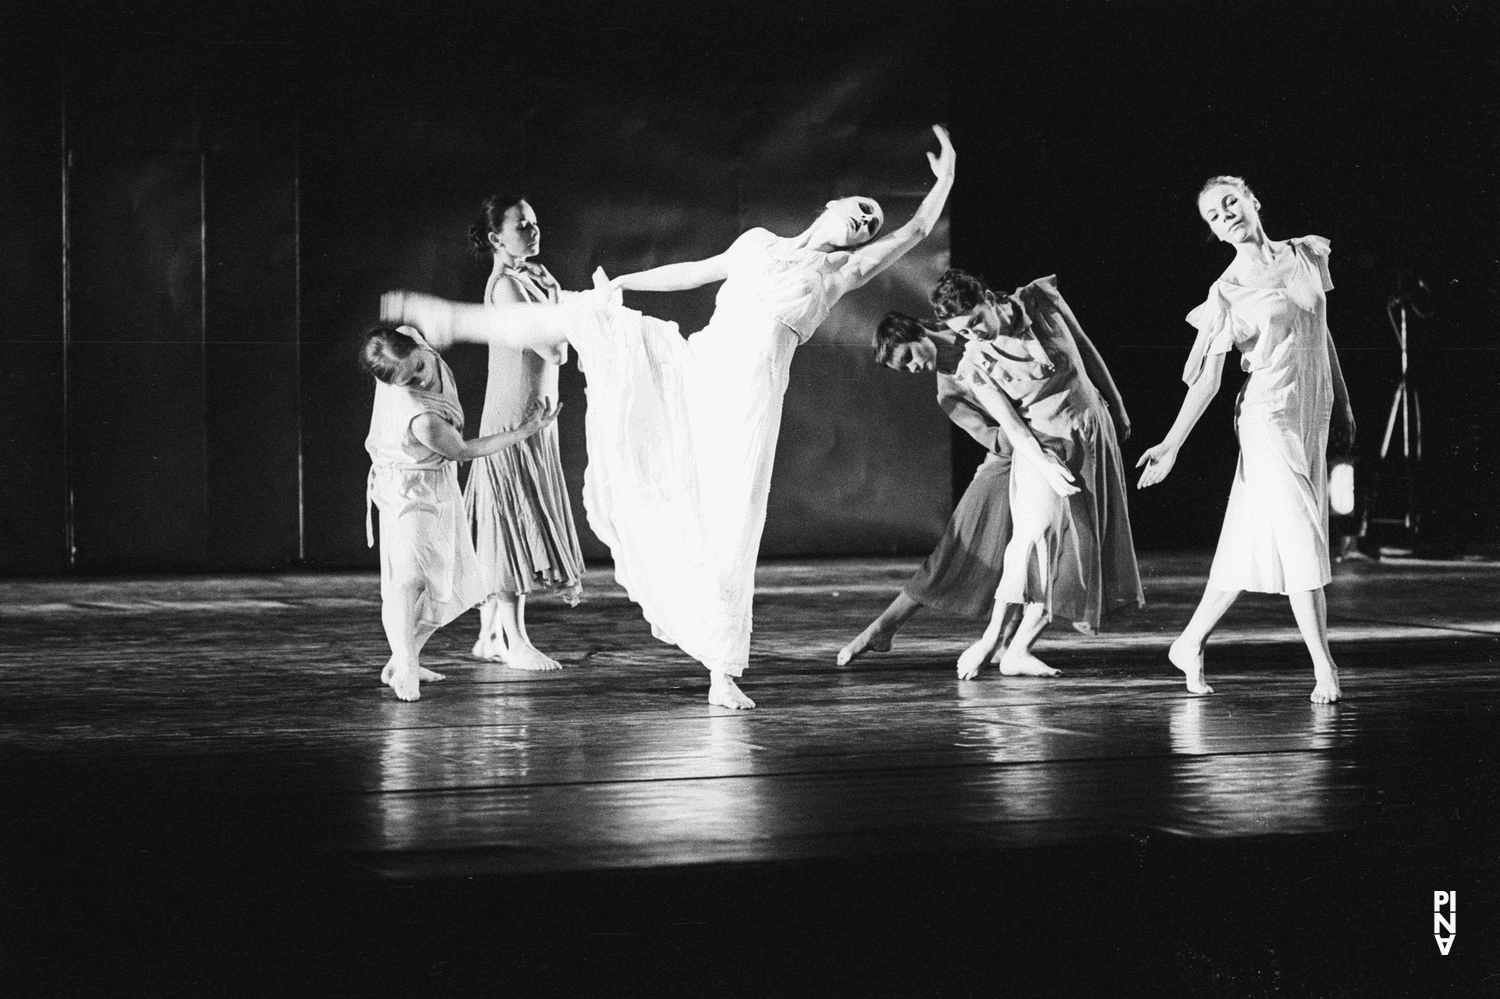 Malou Airaudo in “Iphigenie auf Tauris” by Pina Bausch with Tanztheater Wuppertal at Opernhaus Wuppertal (Germany), April 20, 1974